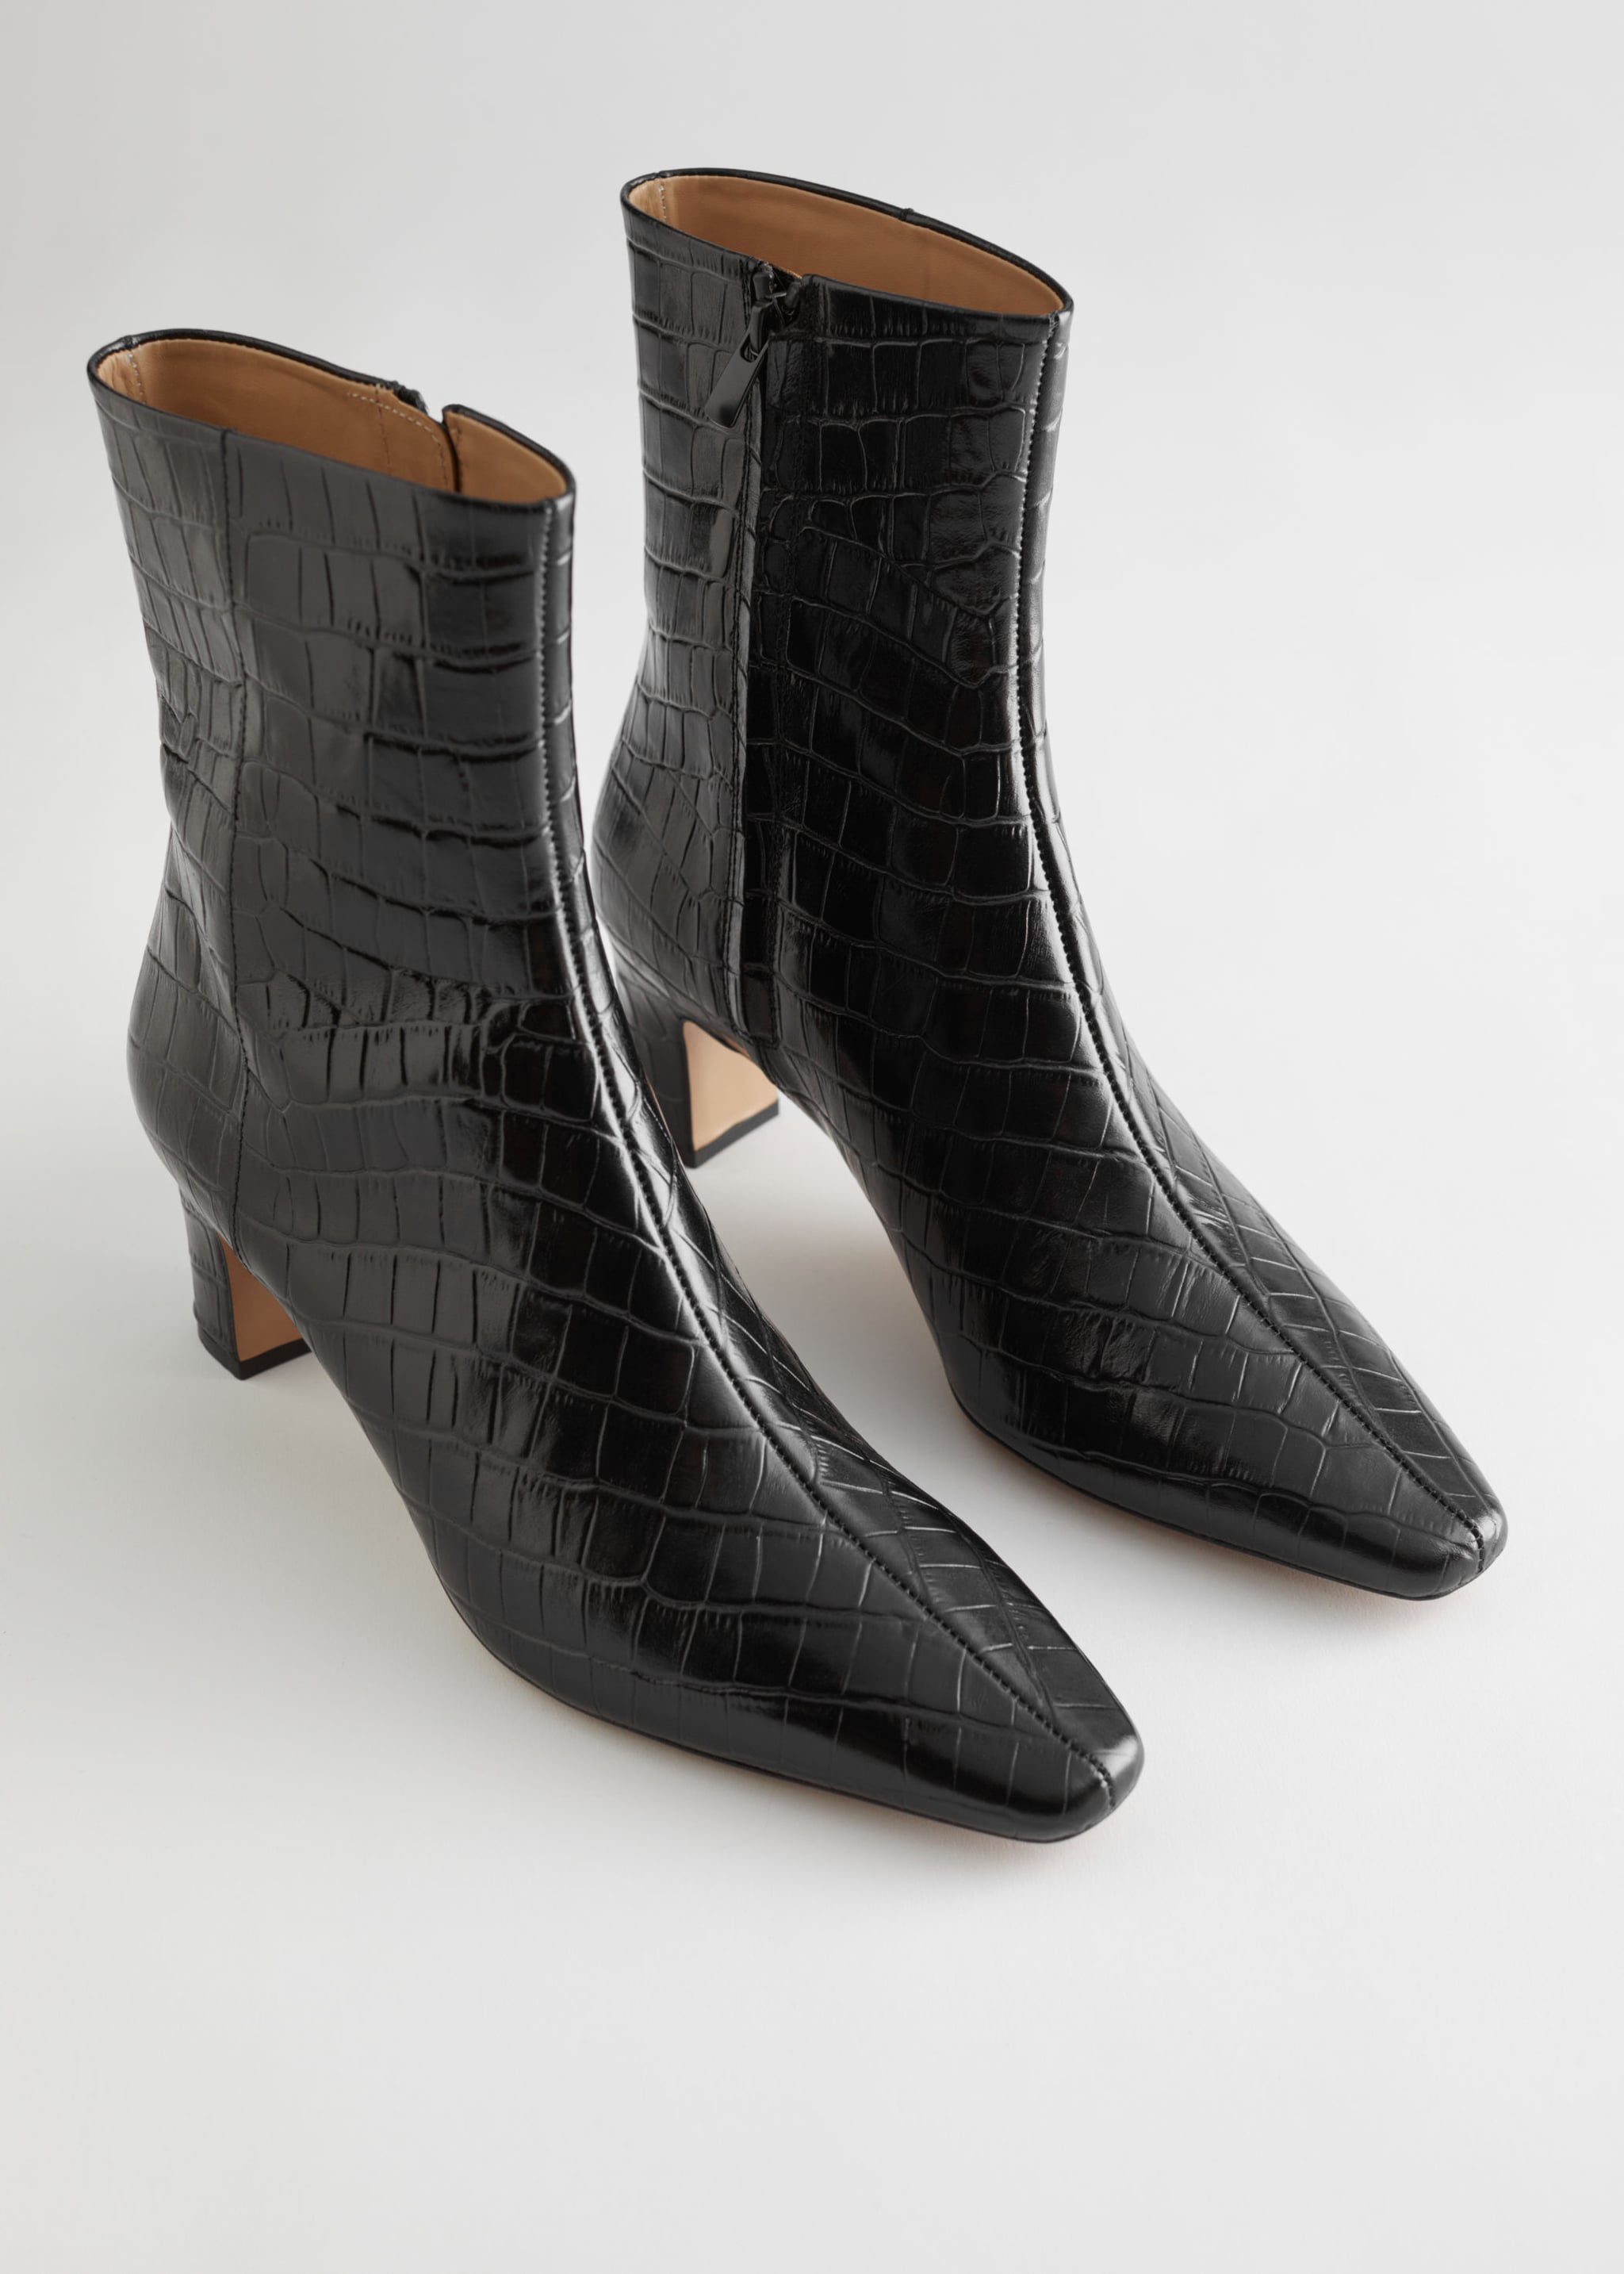 & Other Stories Croc Leather Heeled Ankle Boots | These Chic Leather Boots Give Us a Reason to Go Out (or and Take Pics) | POPSUGAR Fashion Photo 7